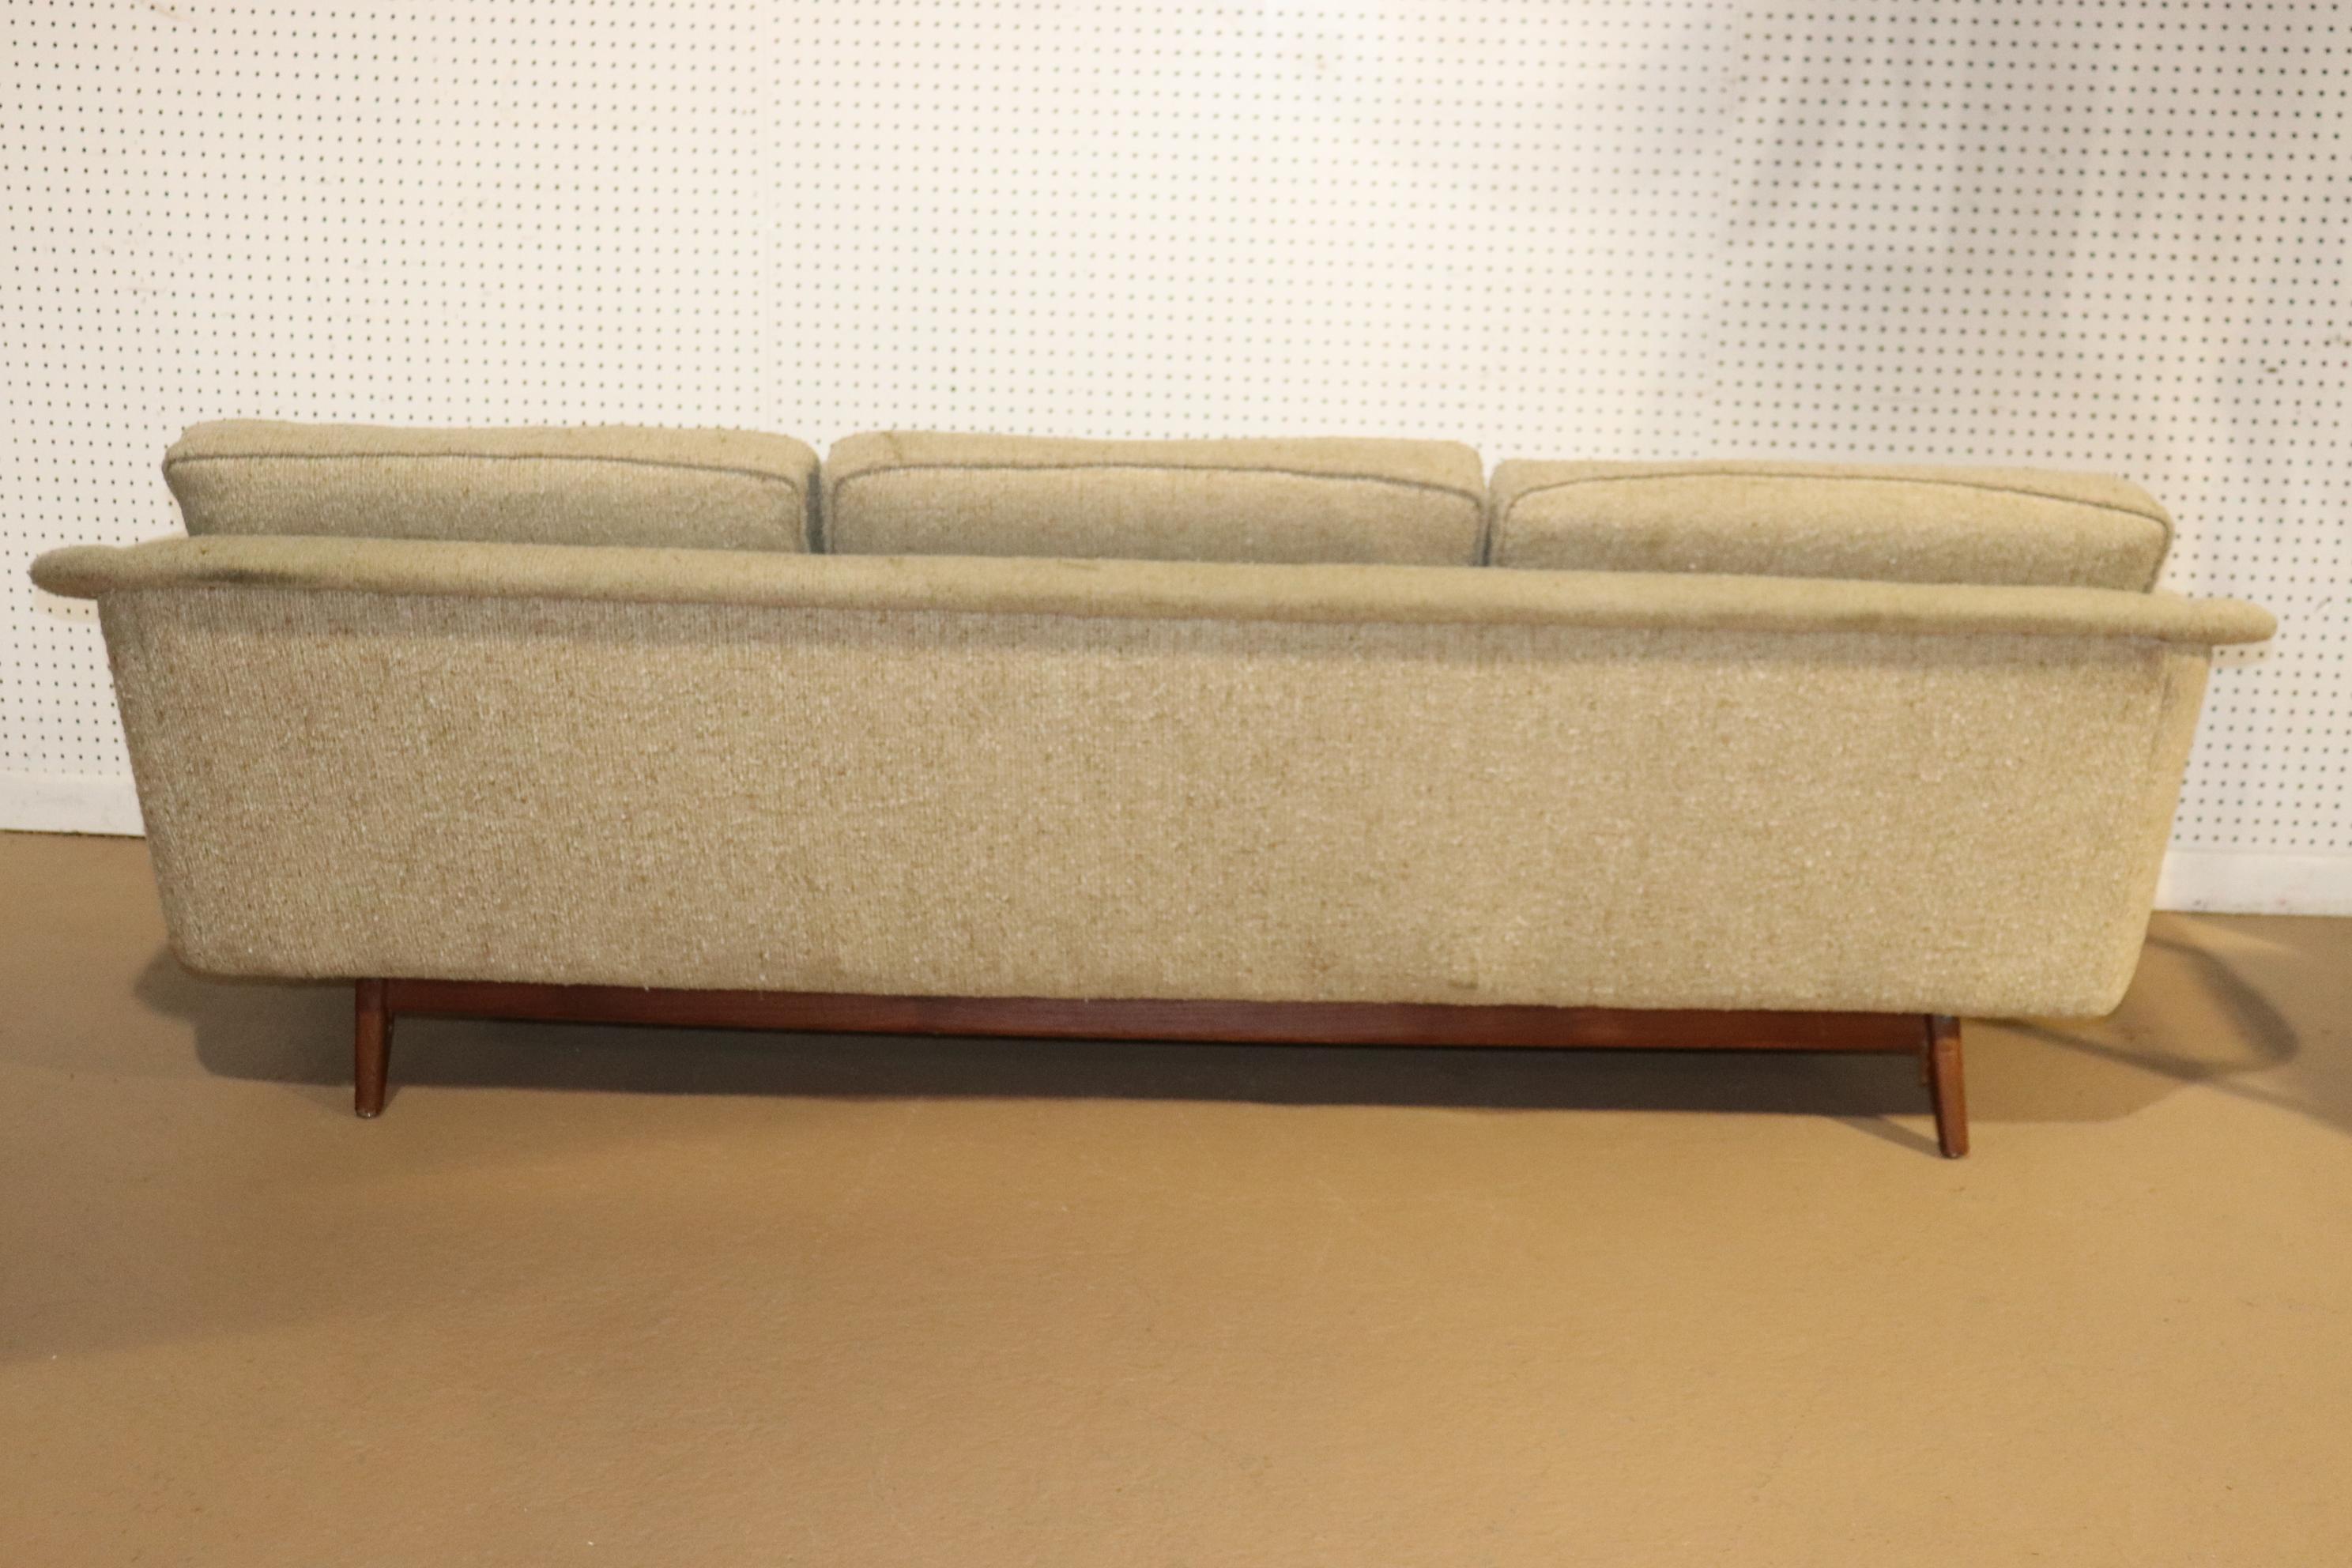 Long mid-century sofa by Folke Ohlsson for Dux with three wide seats, set on teak wood base. Attractive modern design features a slopping back that flows down to the arms.
Please confirm location NY or NJ.